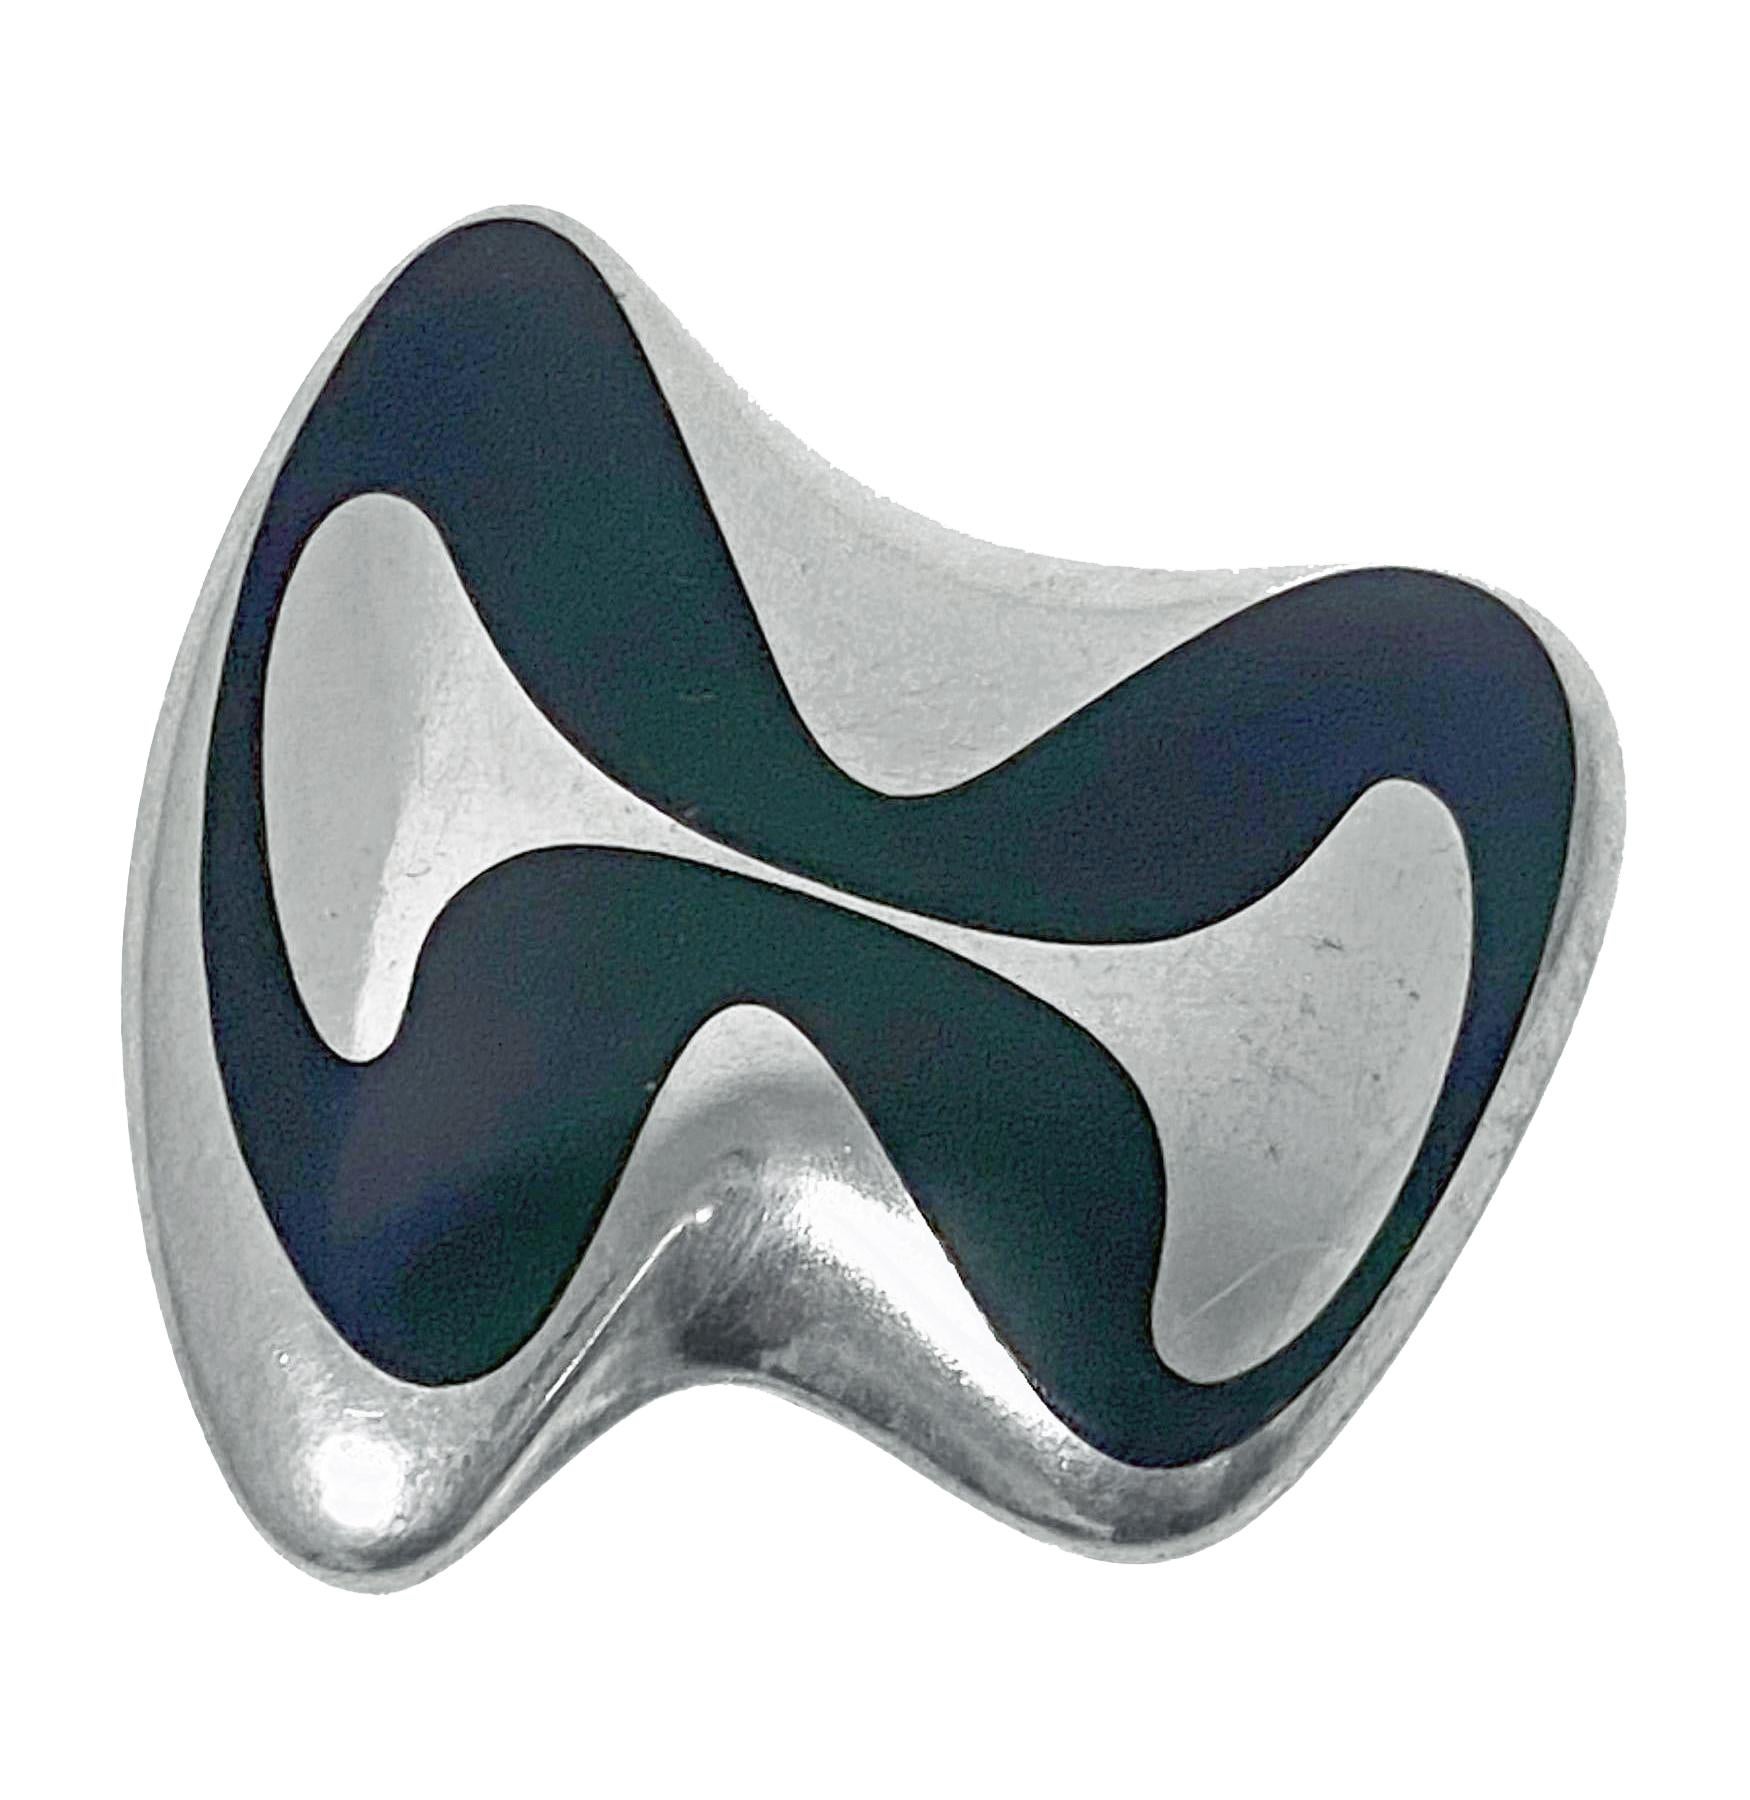 Georg Jensen Henning Koppel abstract sculptural enamel and sterling Brooch, Denmark, C.1954. The Brooch of sculptural abstract form, green enamel. Full marks to reverse and HK for Henning Koppel and numbered 315. See p 118 Georg Jensen Jewelry.